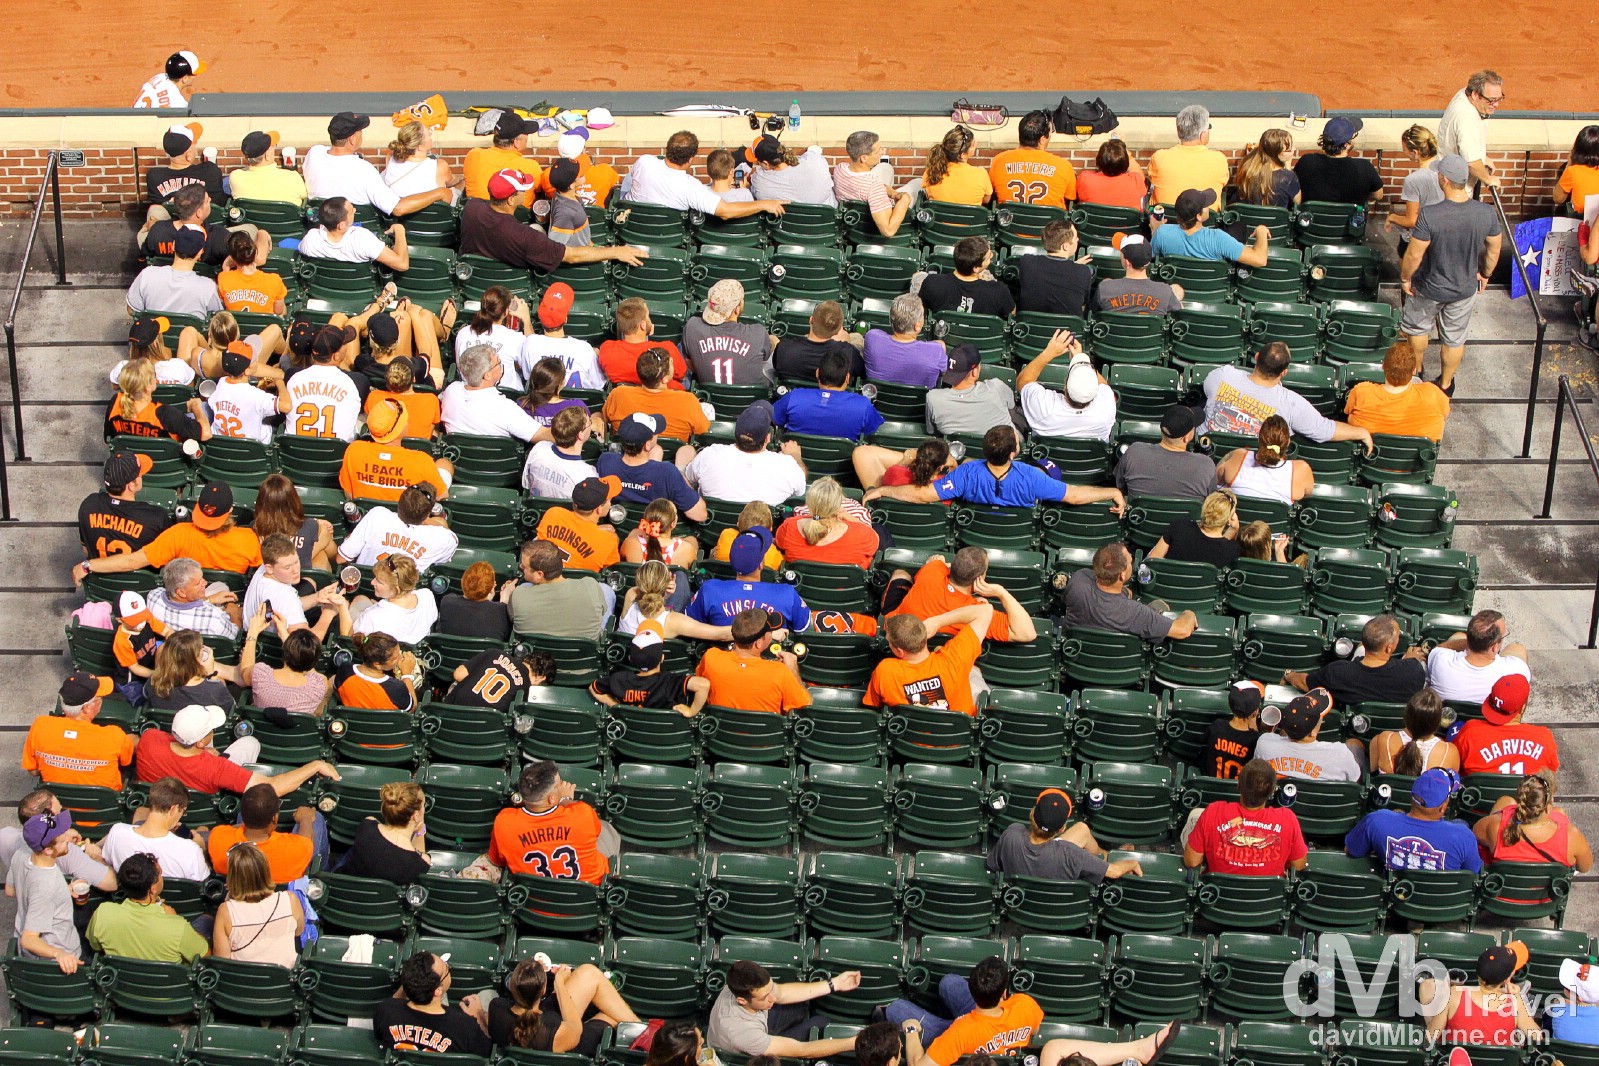 Oriole fans at Oriole Park at Camden Yards, Baltimore, Maryland, USA. July 10th 2013.